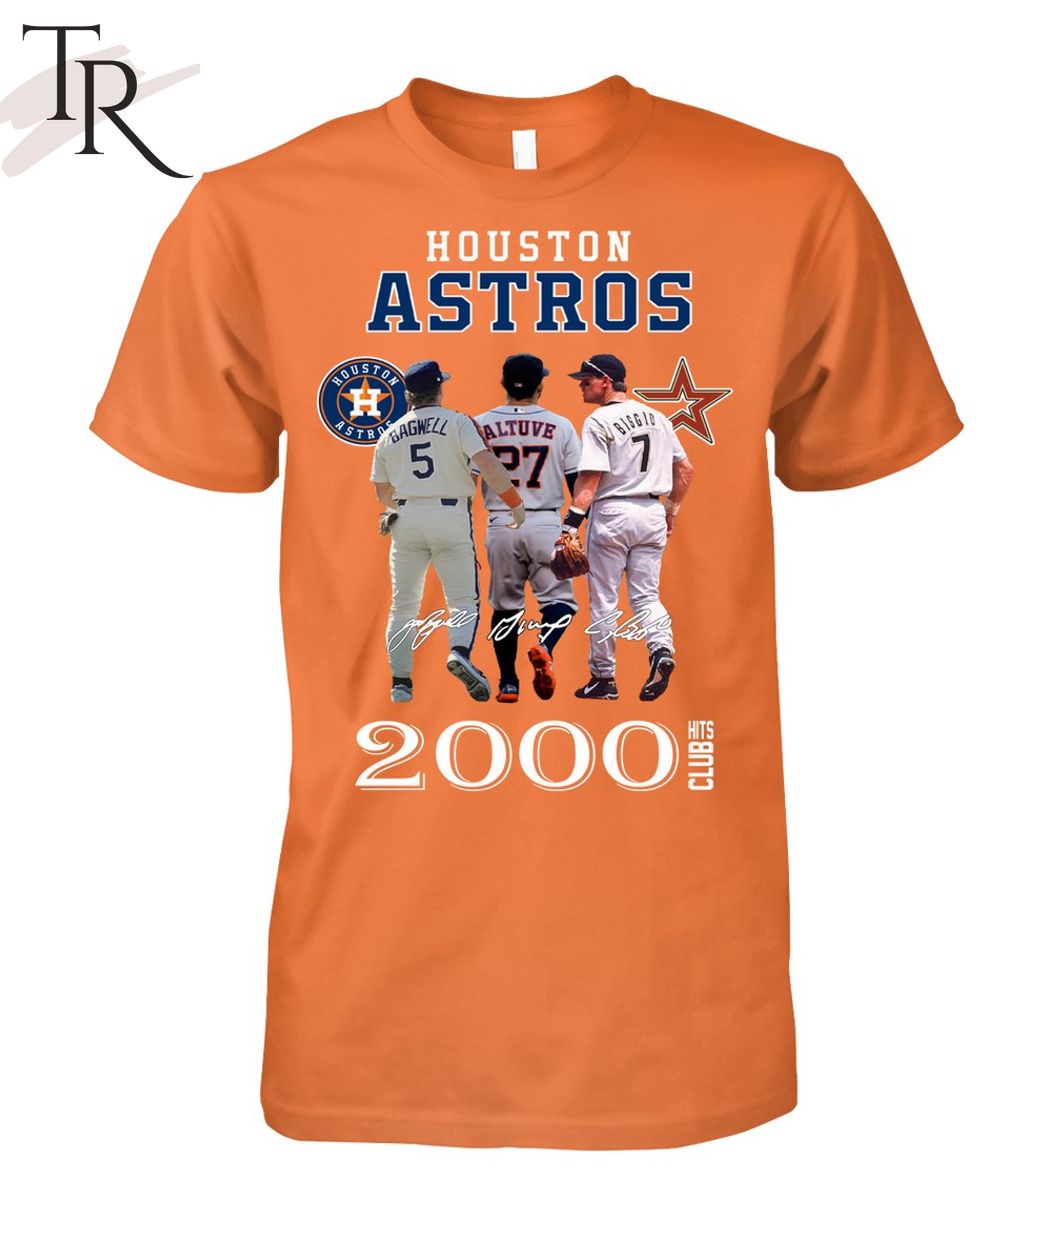 Houston Astros Girl Classy Sassy And A Bit Smart Assy Vintage T